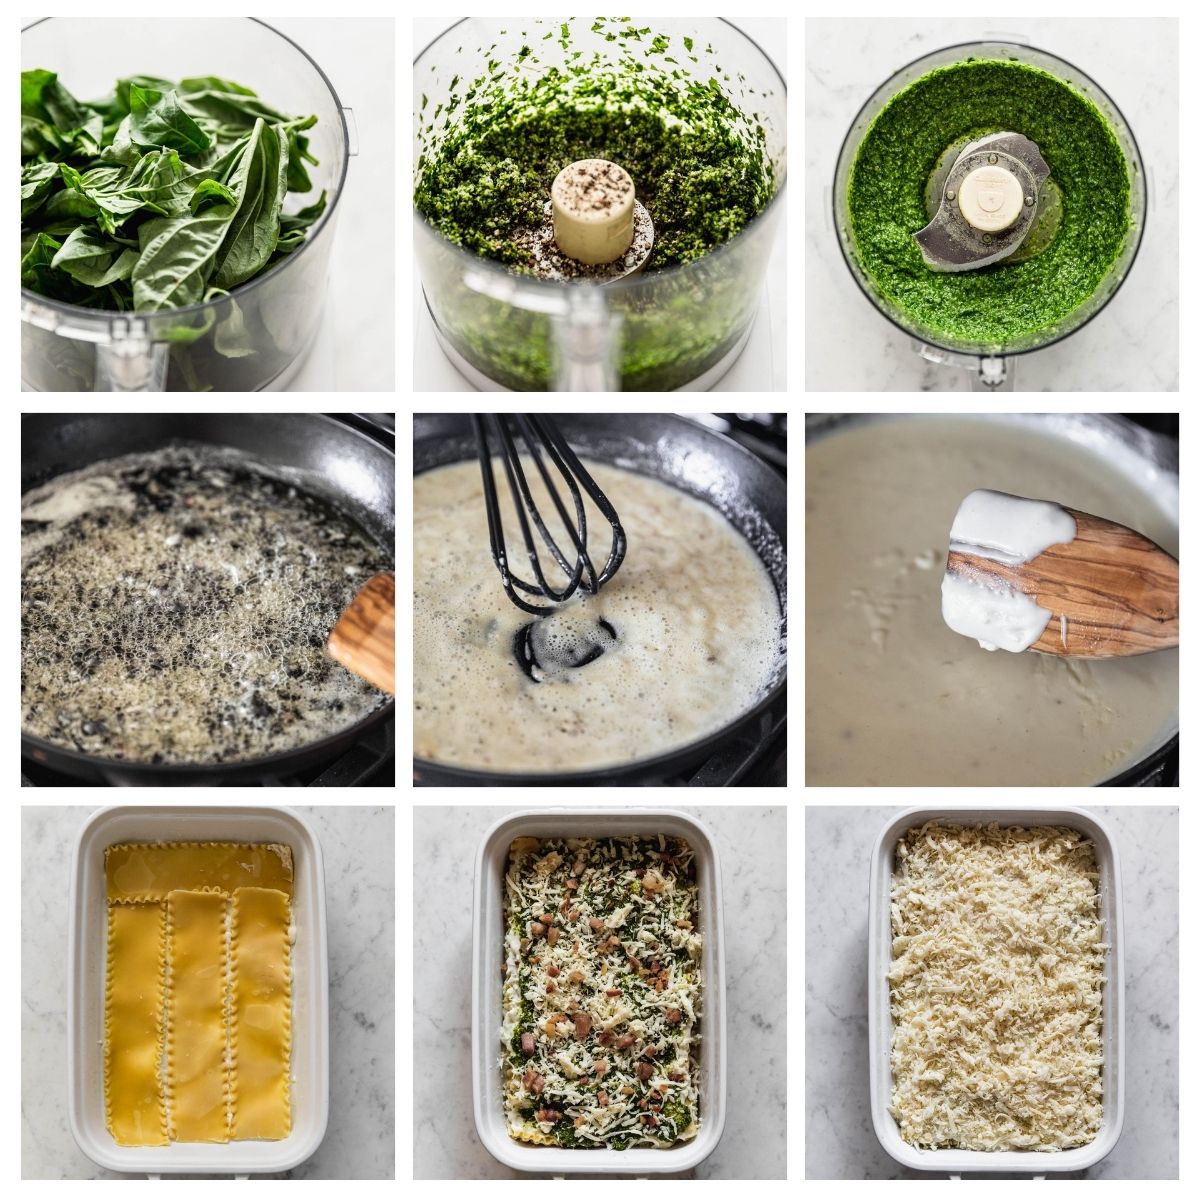 Nine images; on the upper left, a photo of basil in a food processor, in the middle top, basil chopped up in a food processor, and on the right, an overhead shot of pesto in a food processor on a marble counter. In the middle row, a side image of butter and shallots cooking in a pan. In the middle, roux being whisked in a black pan. On the right, bechamel sauce with a wood spoon. On the bottom row, an overhead photo of noodles layered in a cream-colored casserole dish. In the middle, the noodles are layered with cheese, pesto, and pancetta. On the right, the pasta is assembled and topped with cheese.